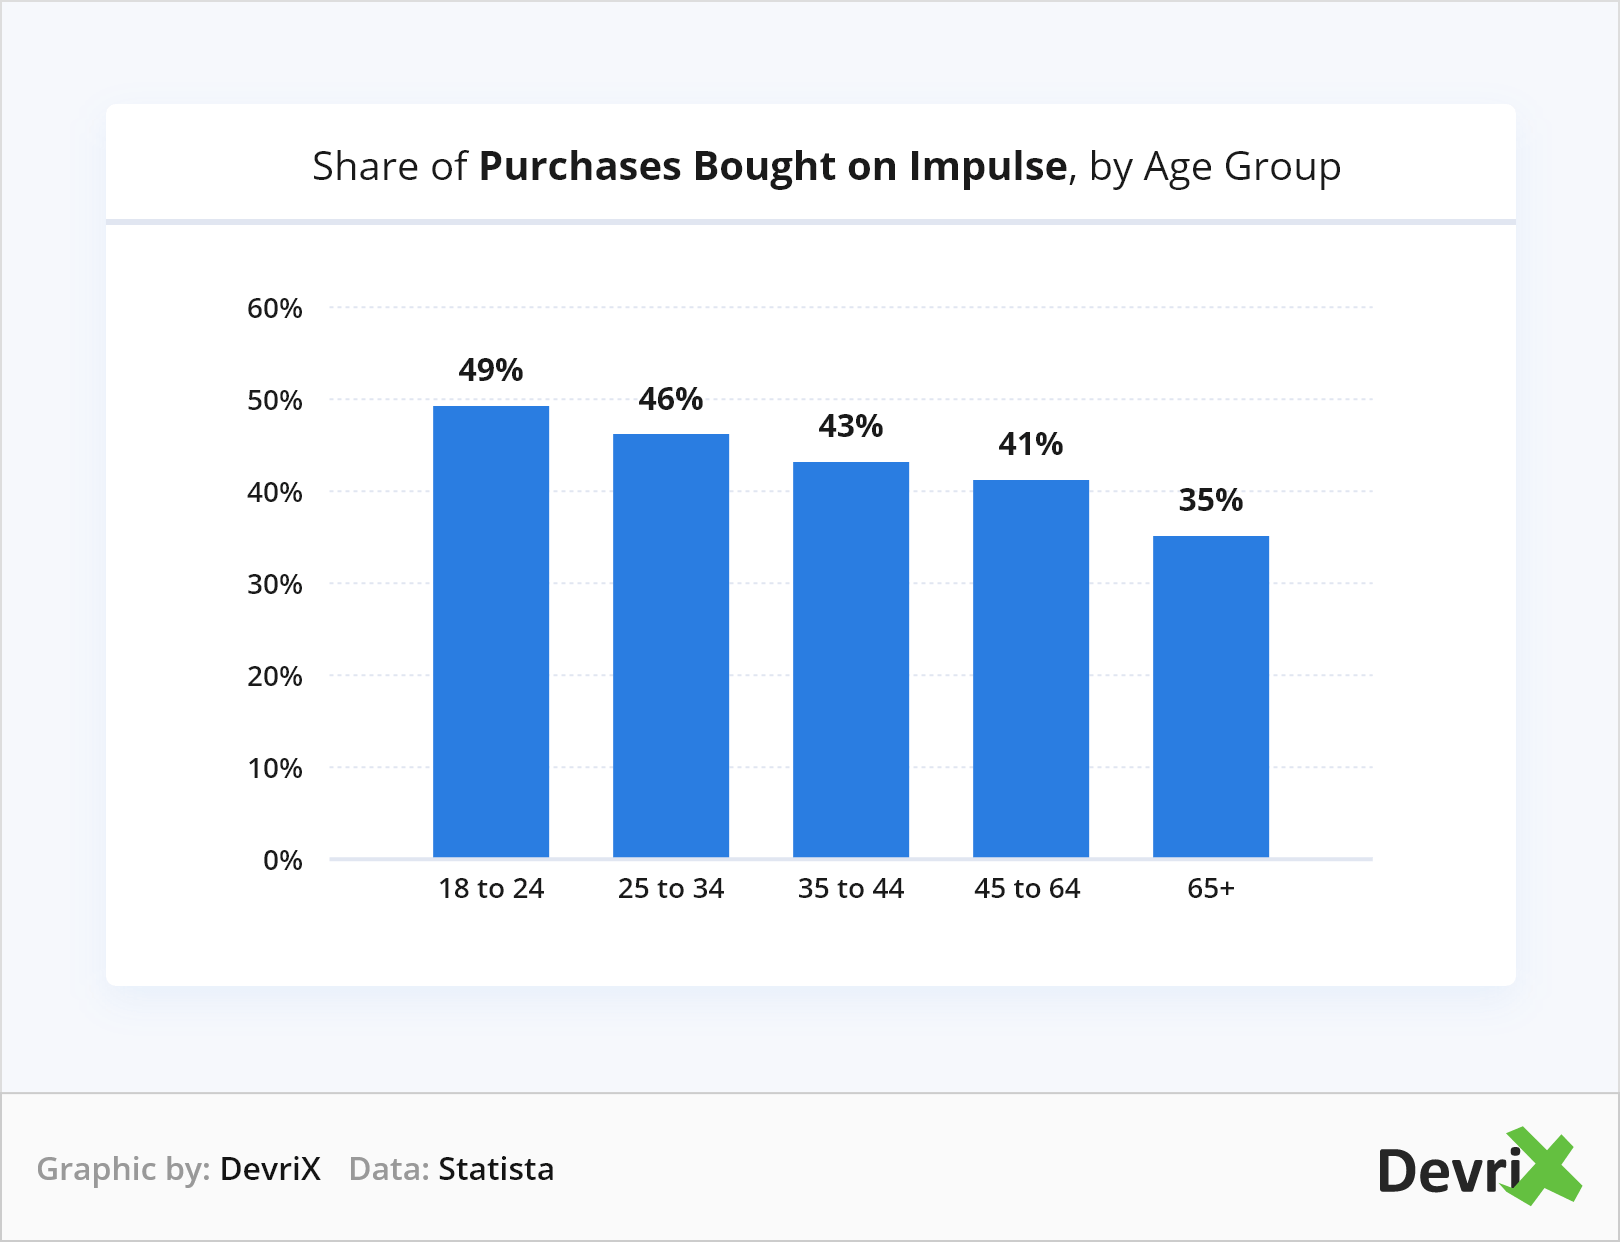 Share of Purchases Bought on Impulse, by Age Group